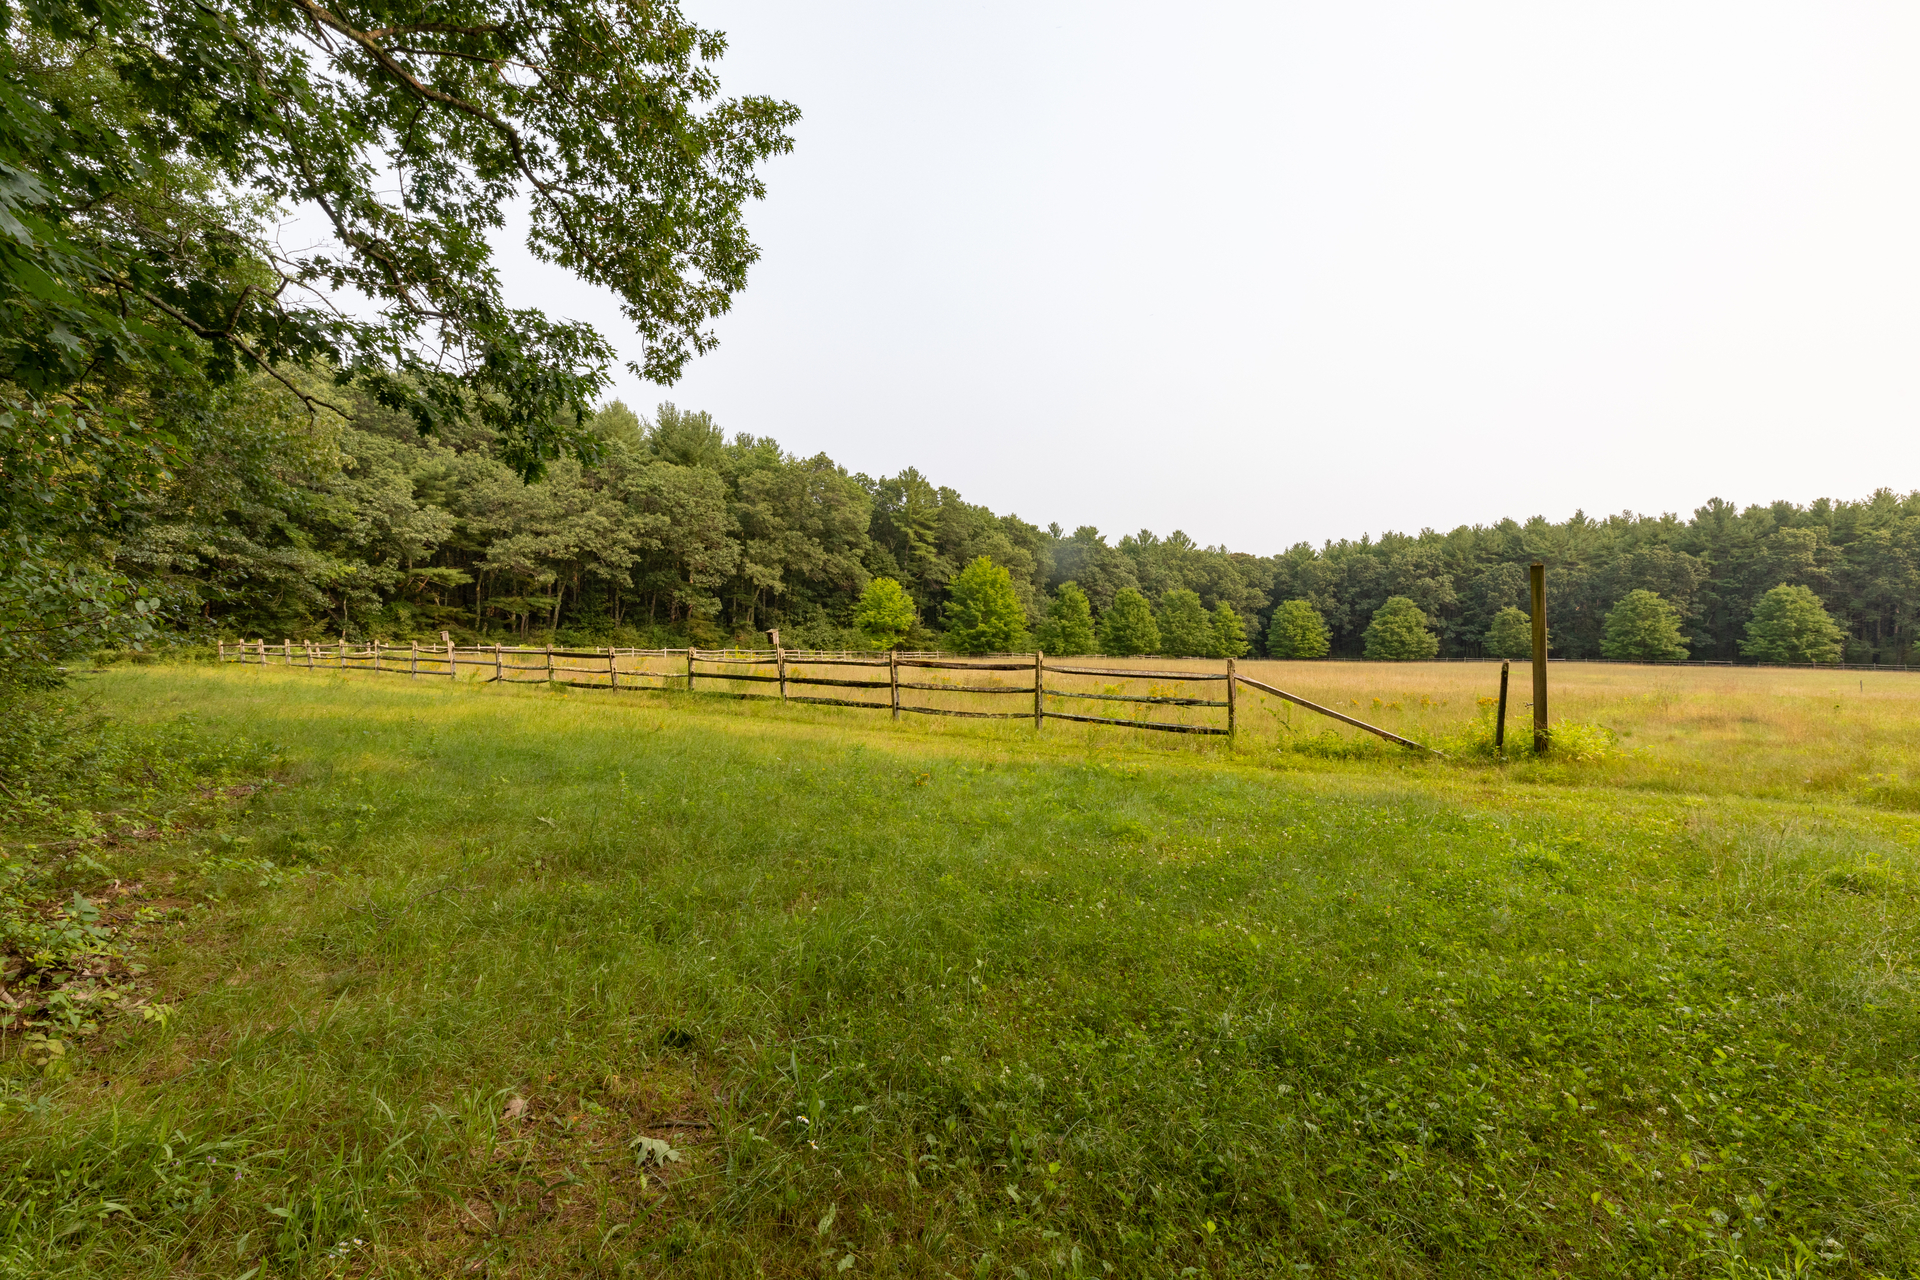 A grassy meadow lined by green pine trees. An old wooden fence running across the middle of the field.